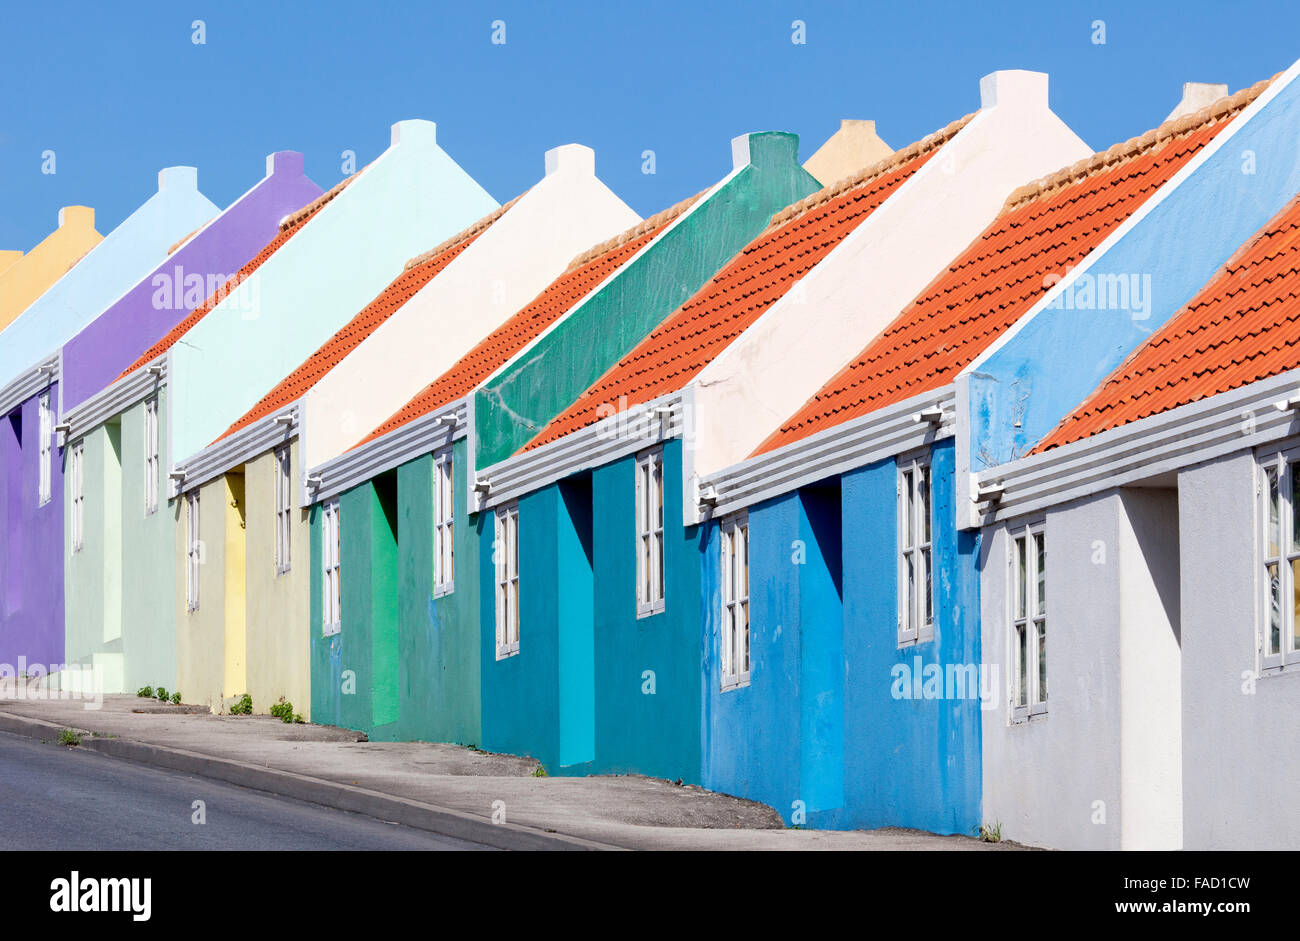 A Row of Colourful Houses on Berg Altena Road, Willemstad, Curacao Stock Photo